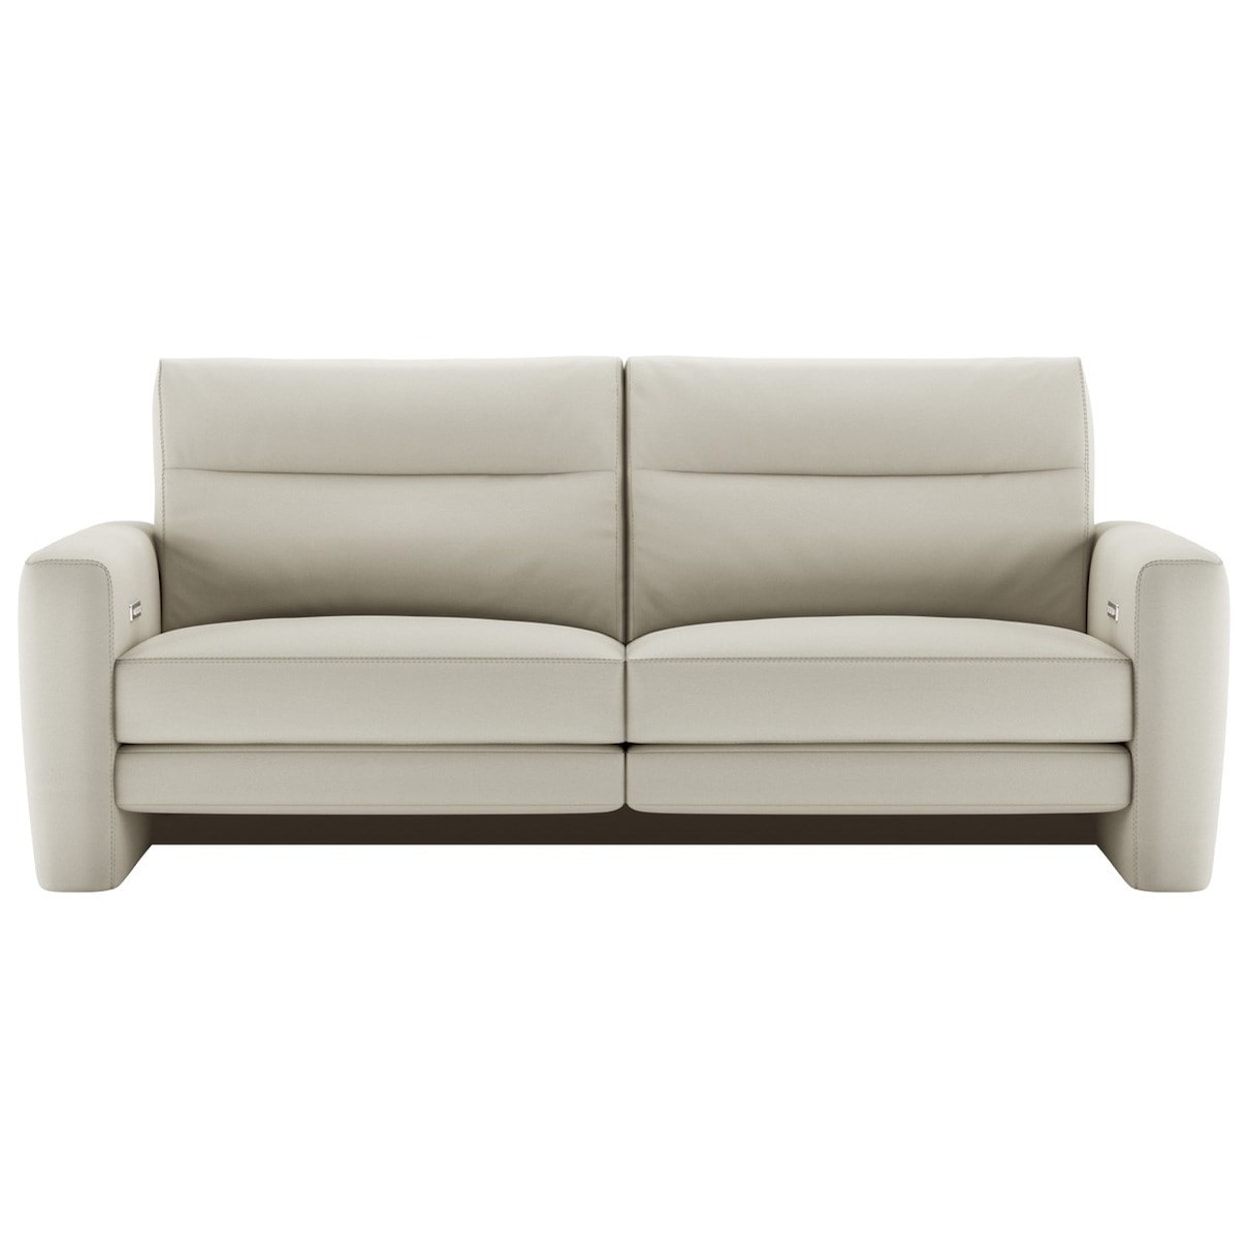 American Leather Chelsea - Style in Motion Power Reclining Sofa